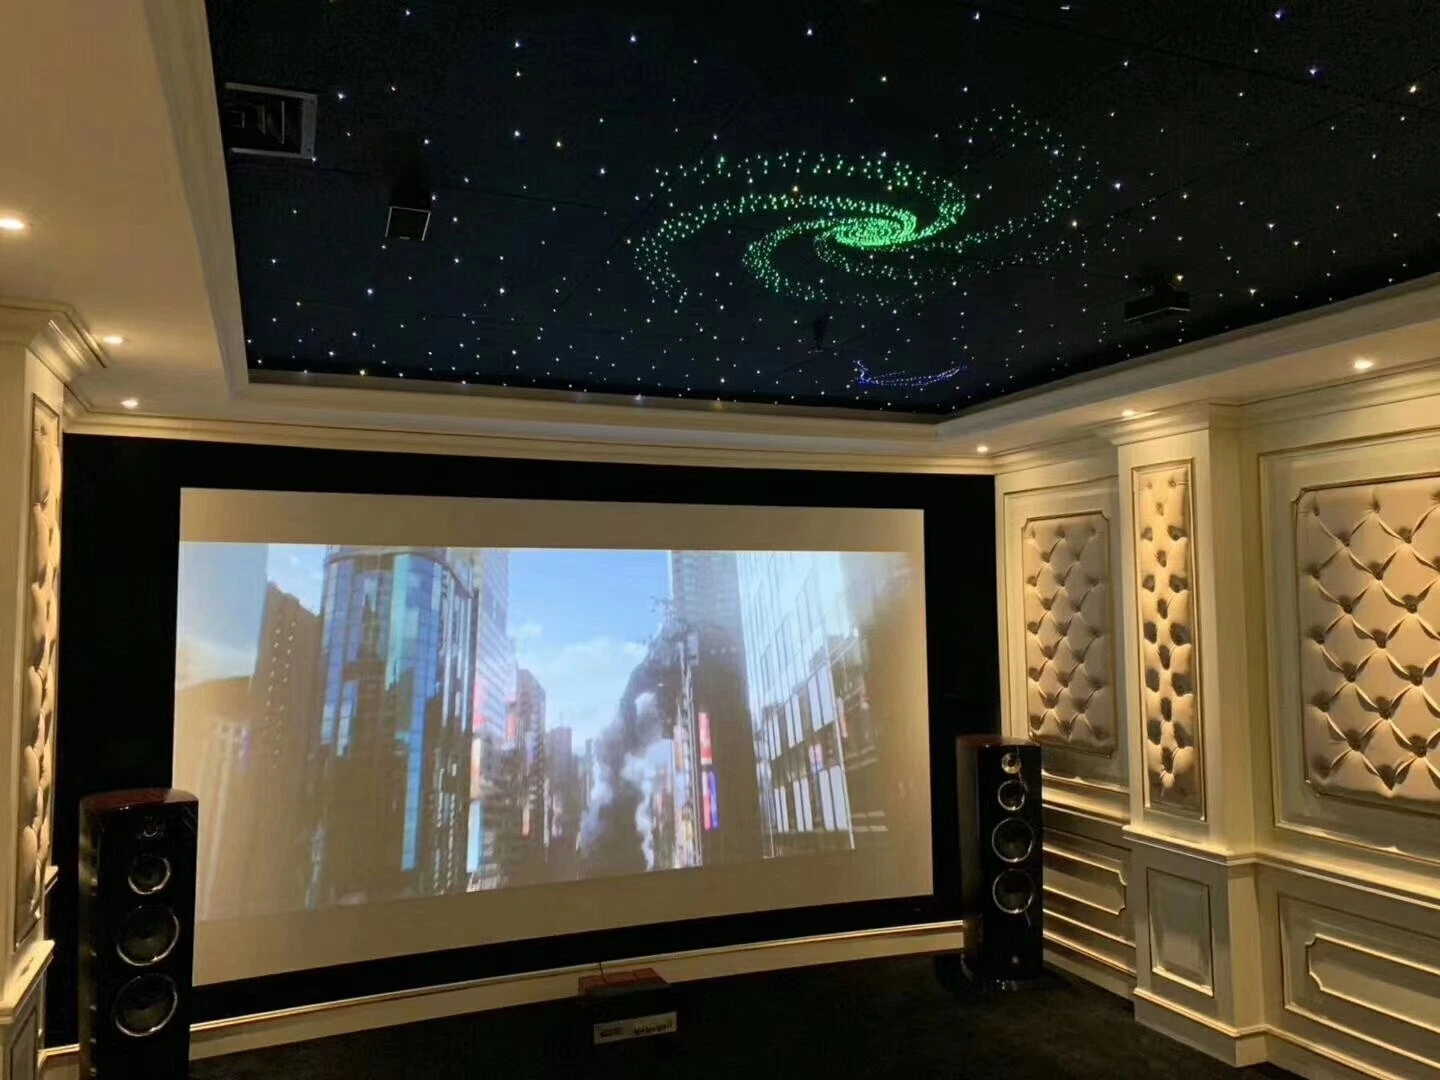 Poyester Fiber Optic Starry Sky Star Ceiling with Shooting Star Elements Acoustic Panels